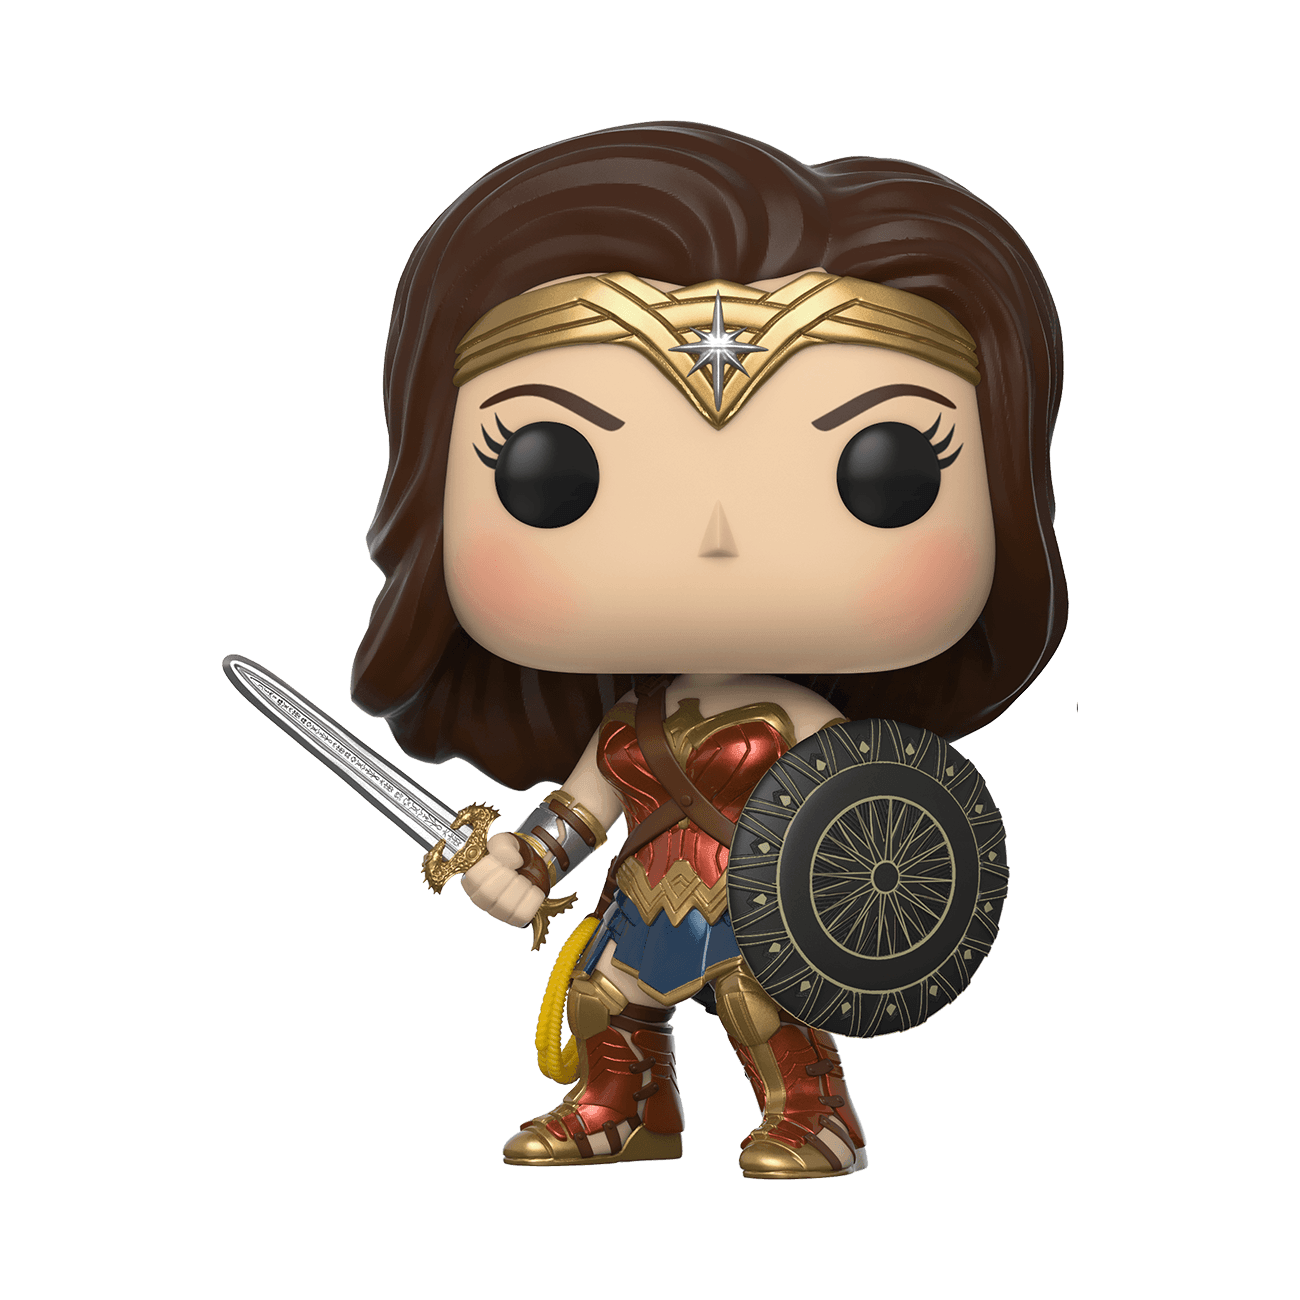 Funko Pop Movies DC Wonder Woman With Sword - BumbleToys - 18+, Avengers, Boys, Characters, Figures, Funko, Girls, Marvel, Pre-Order, Wonder Woman